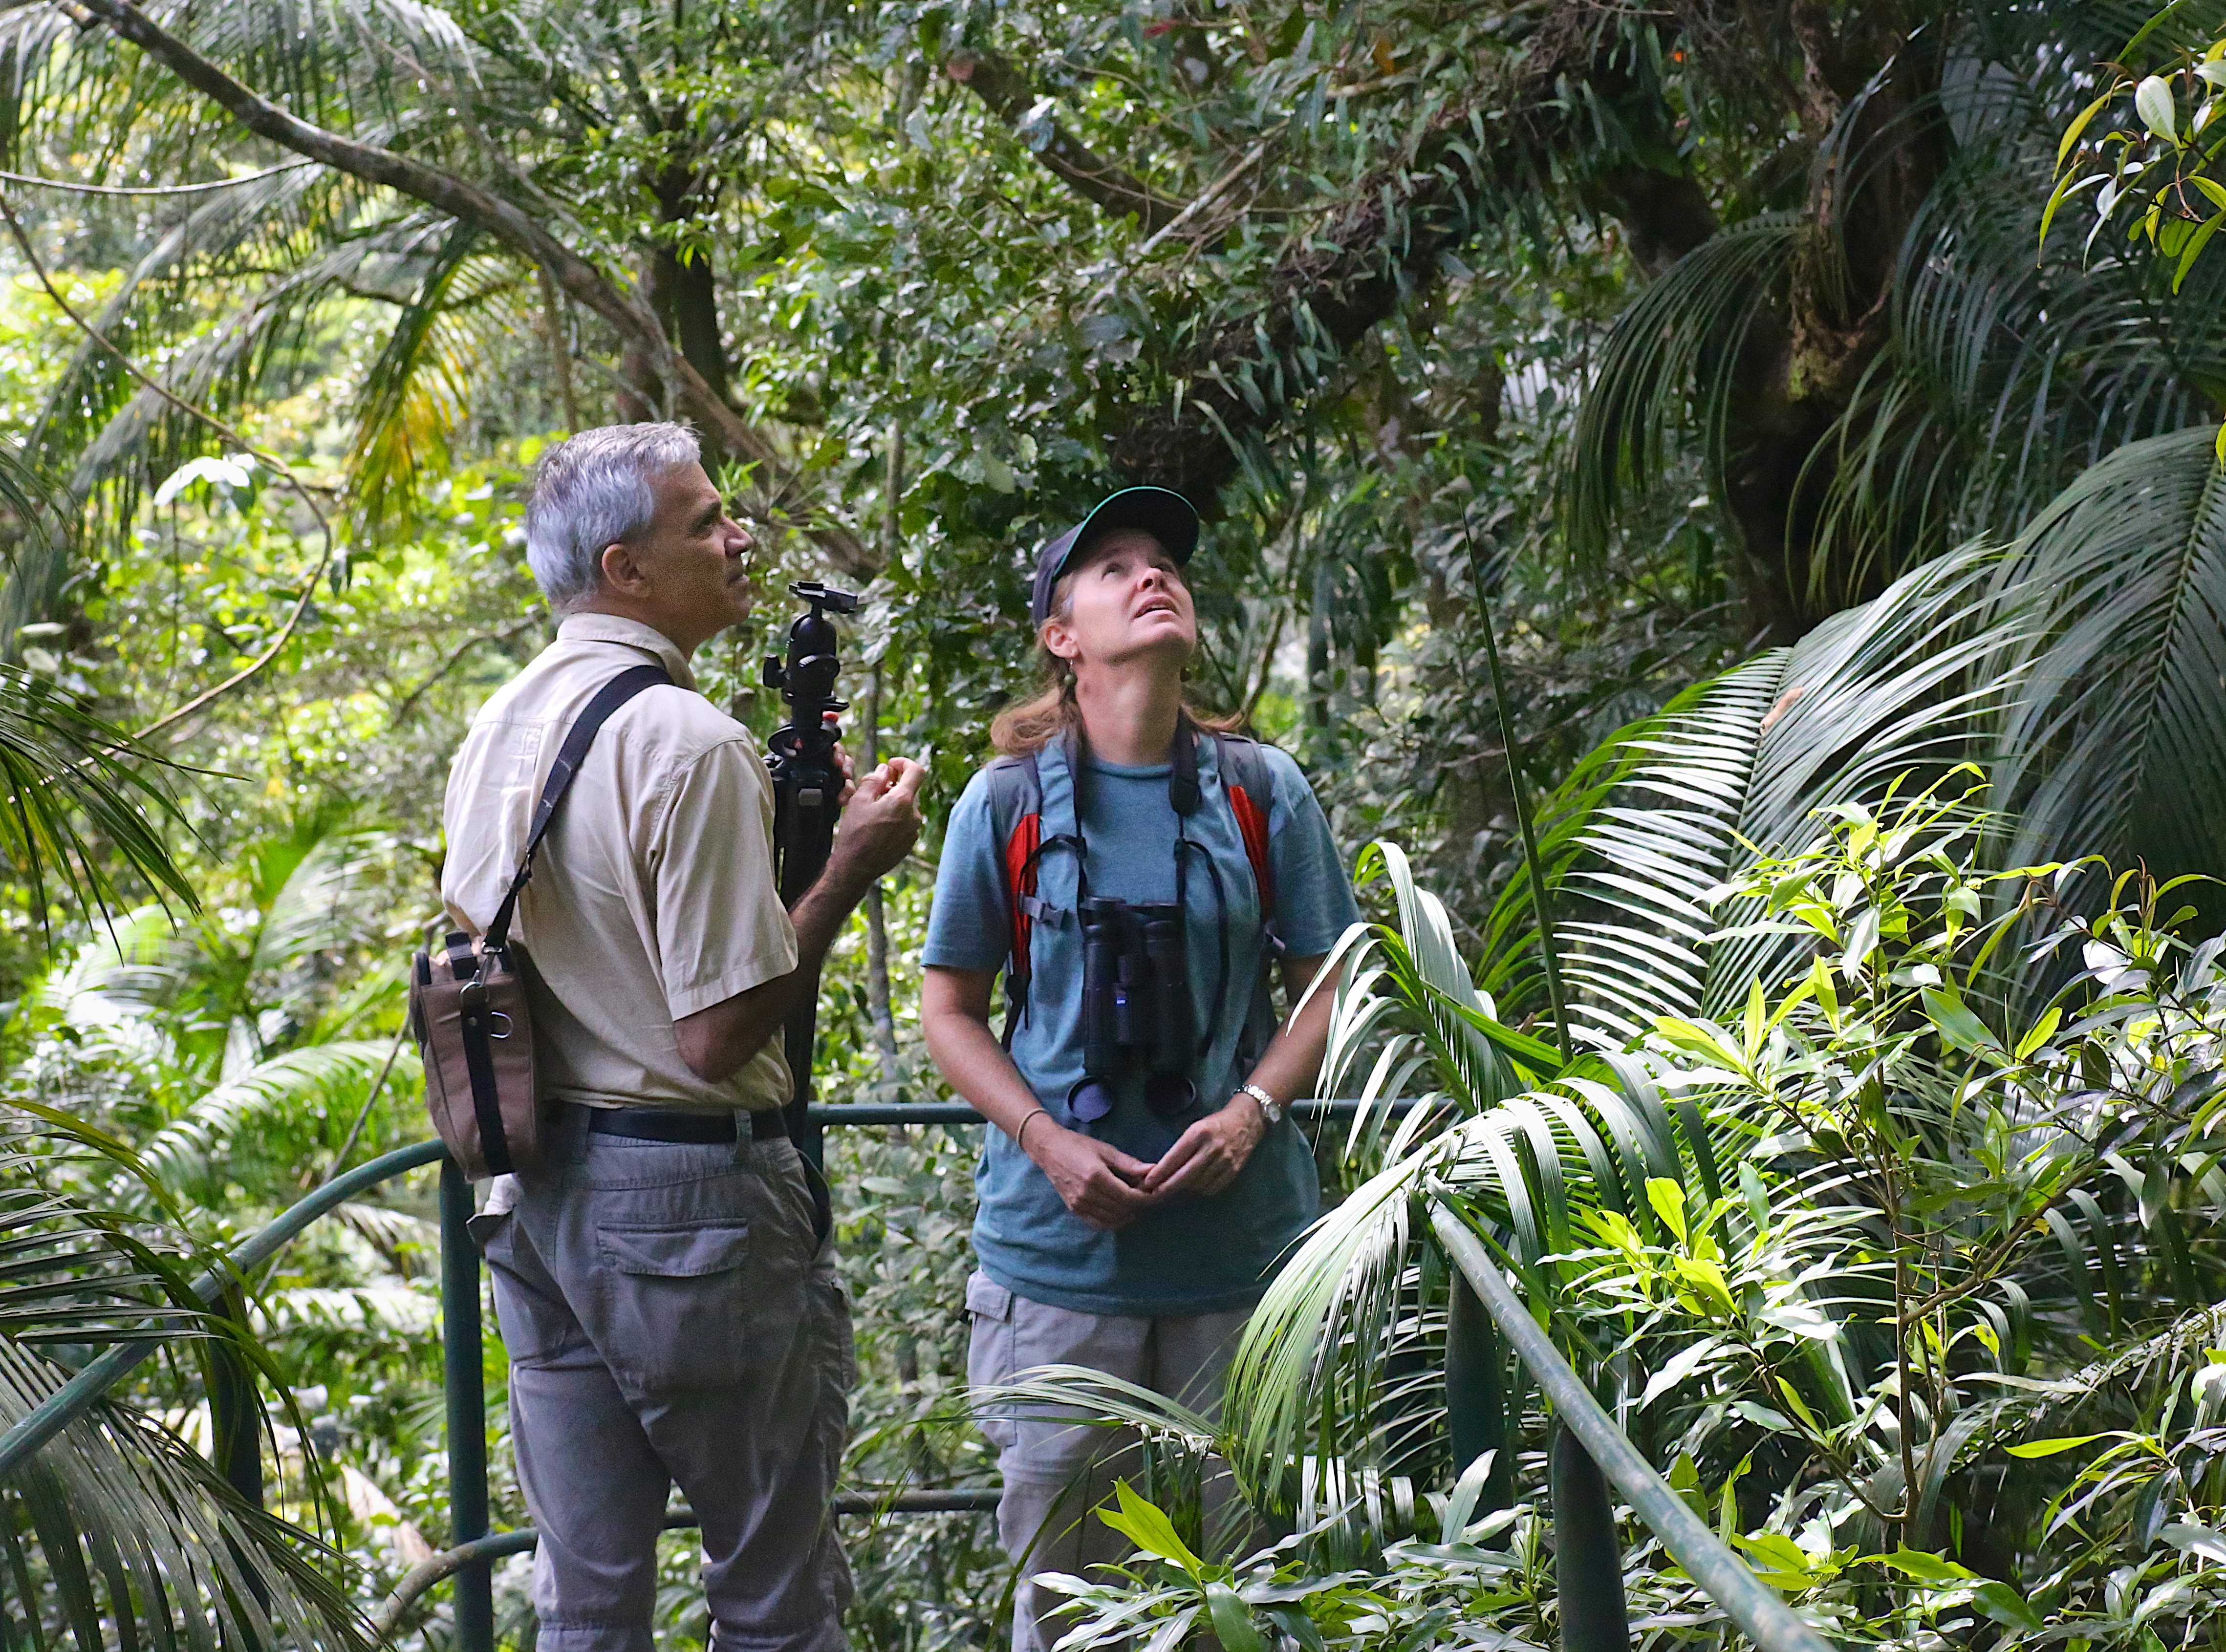 A man and a woman standing in a dense tropical forest